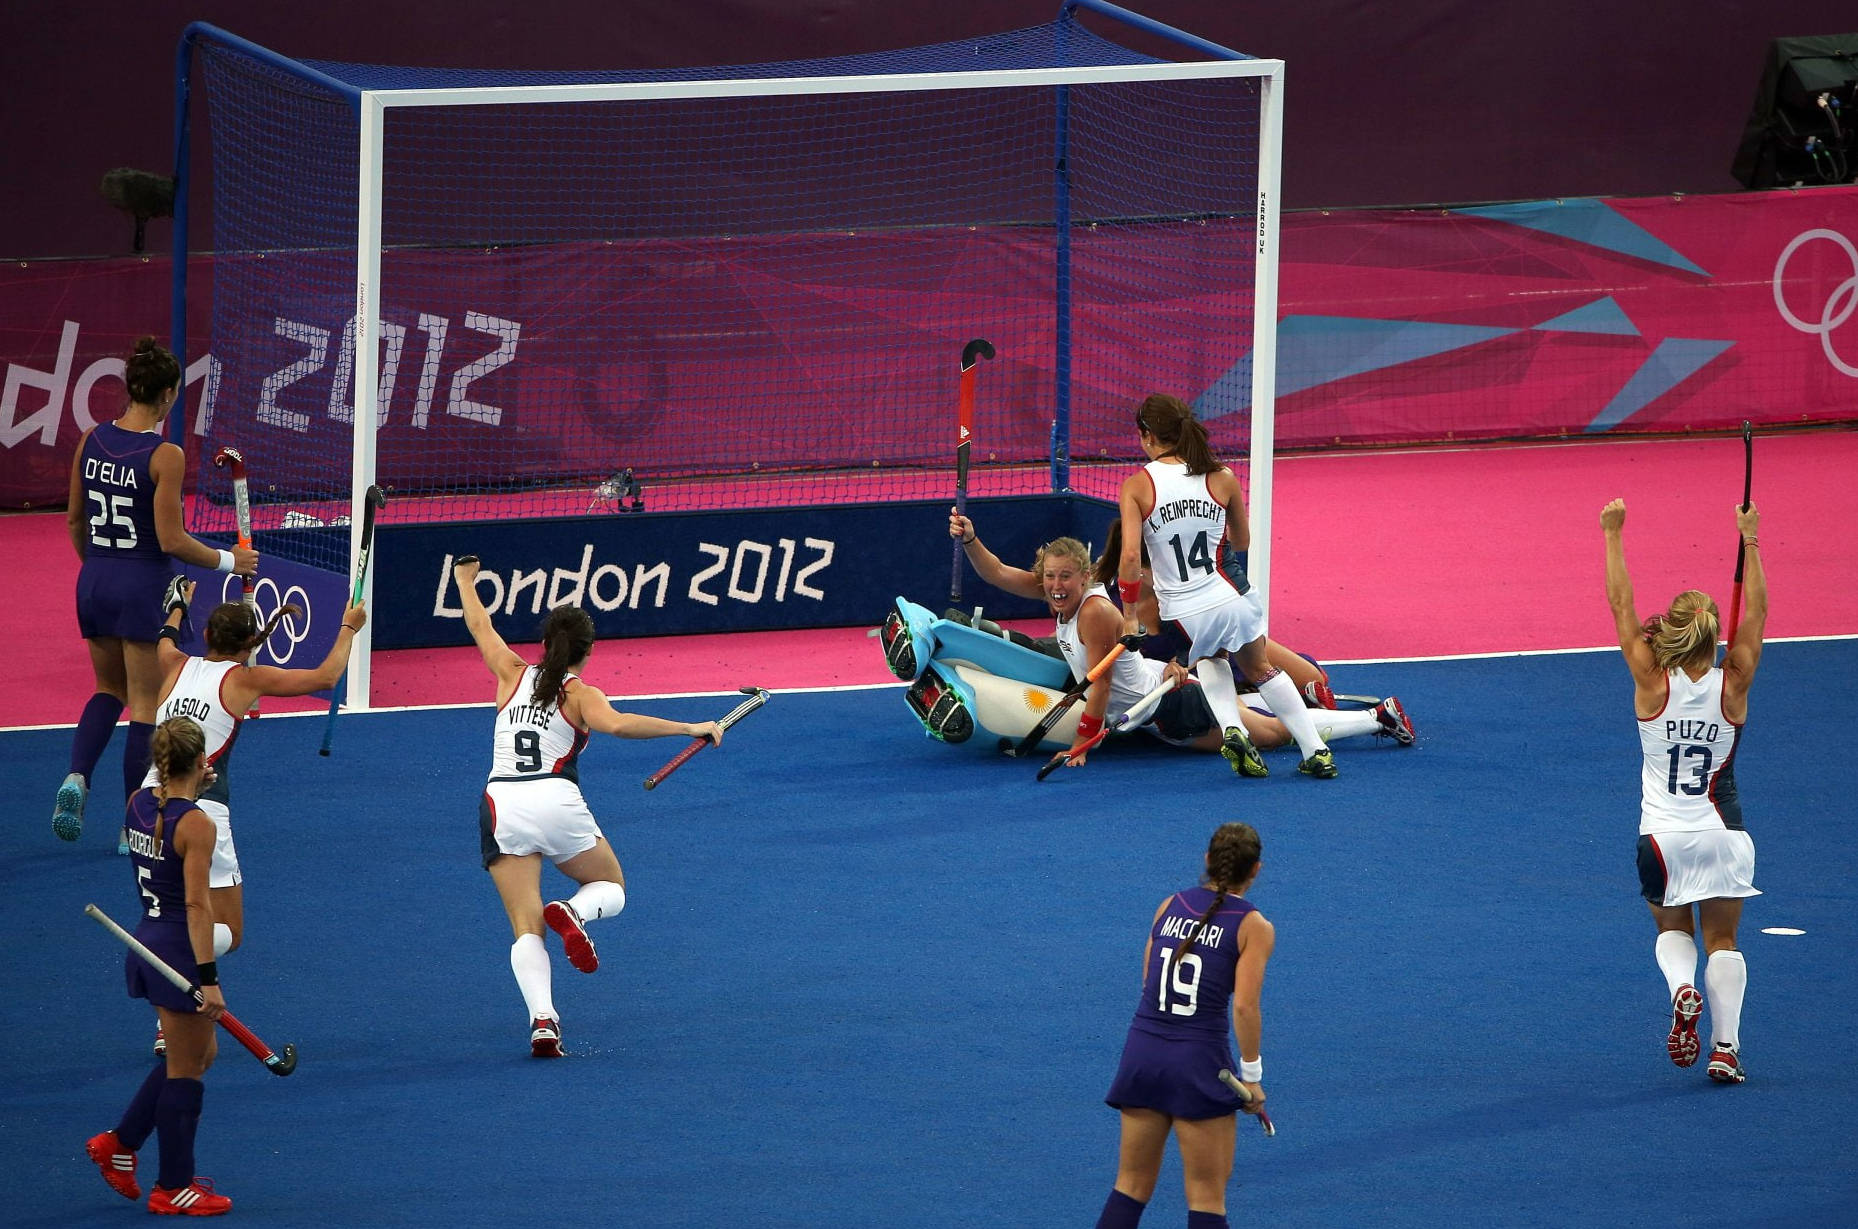 Explosive Field Hockey Match at the 2012 Olympic Games Wallpaper